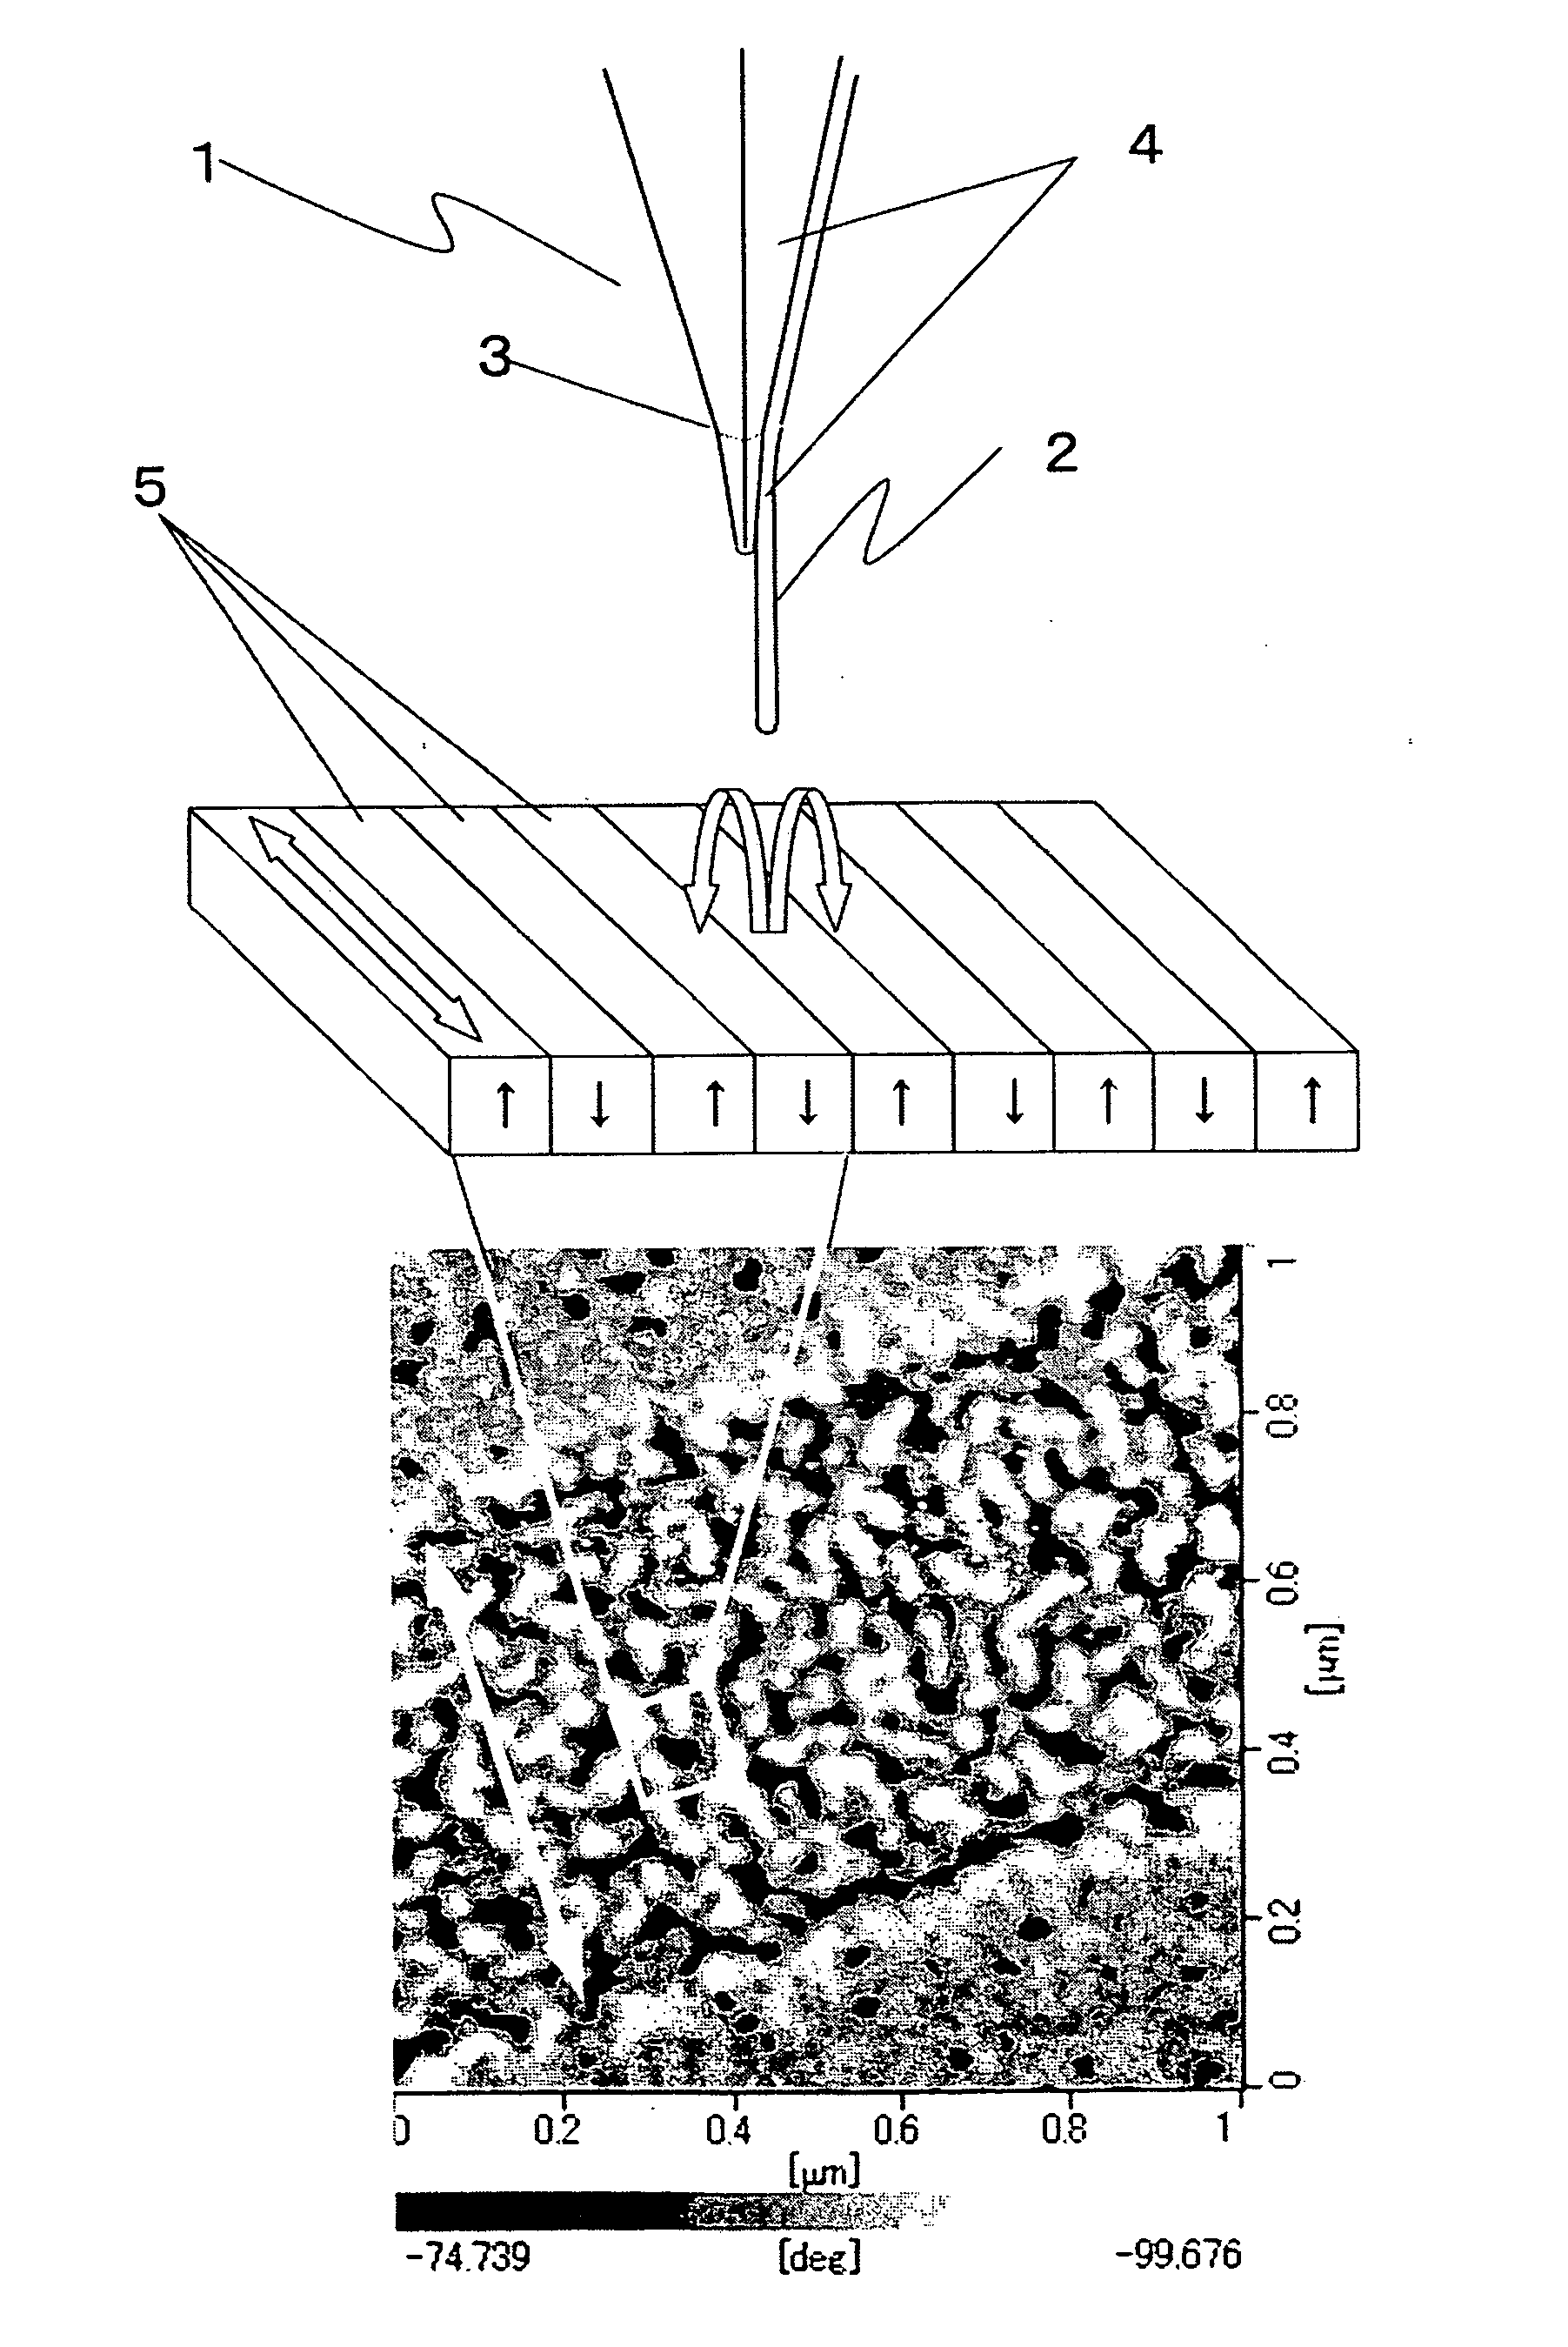 Probe for a scanning magnetic force microscope, method for producing the same, and method for forming ferromagnetic alloy film on carbon nanotubes